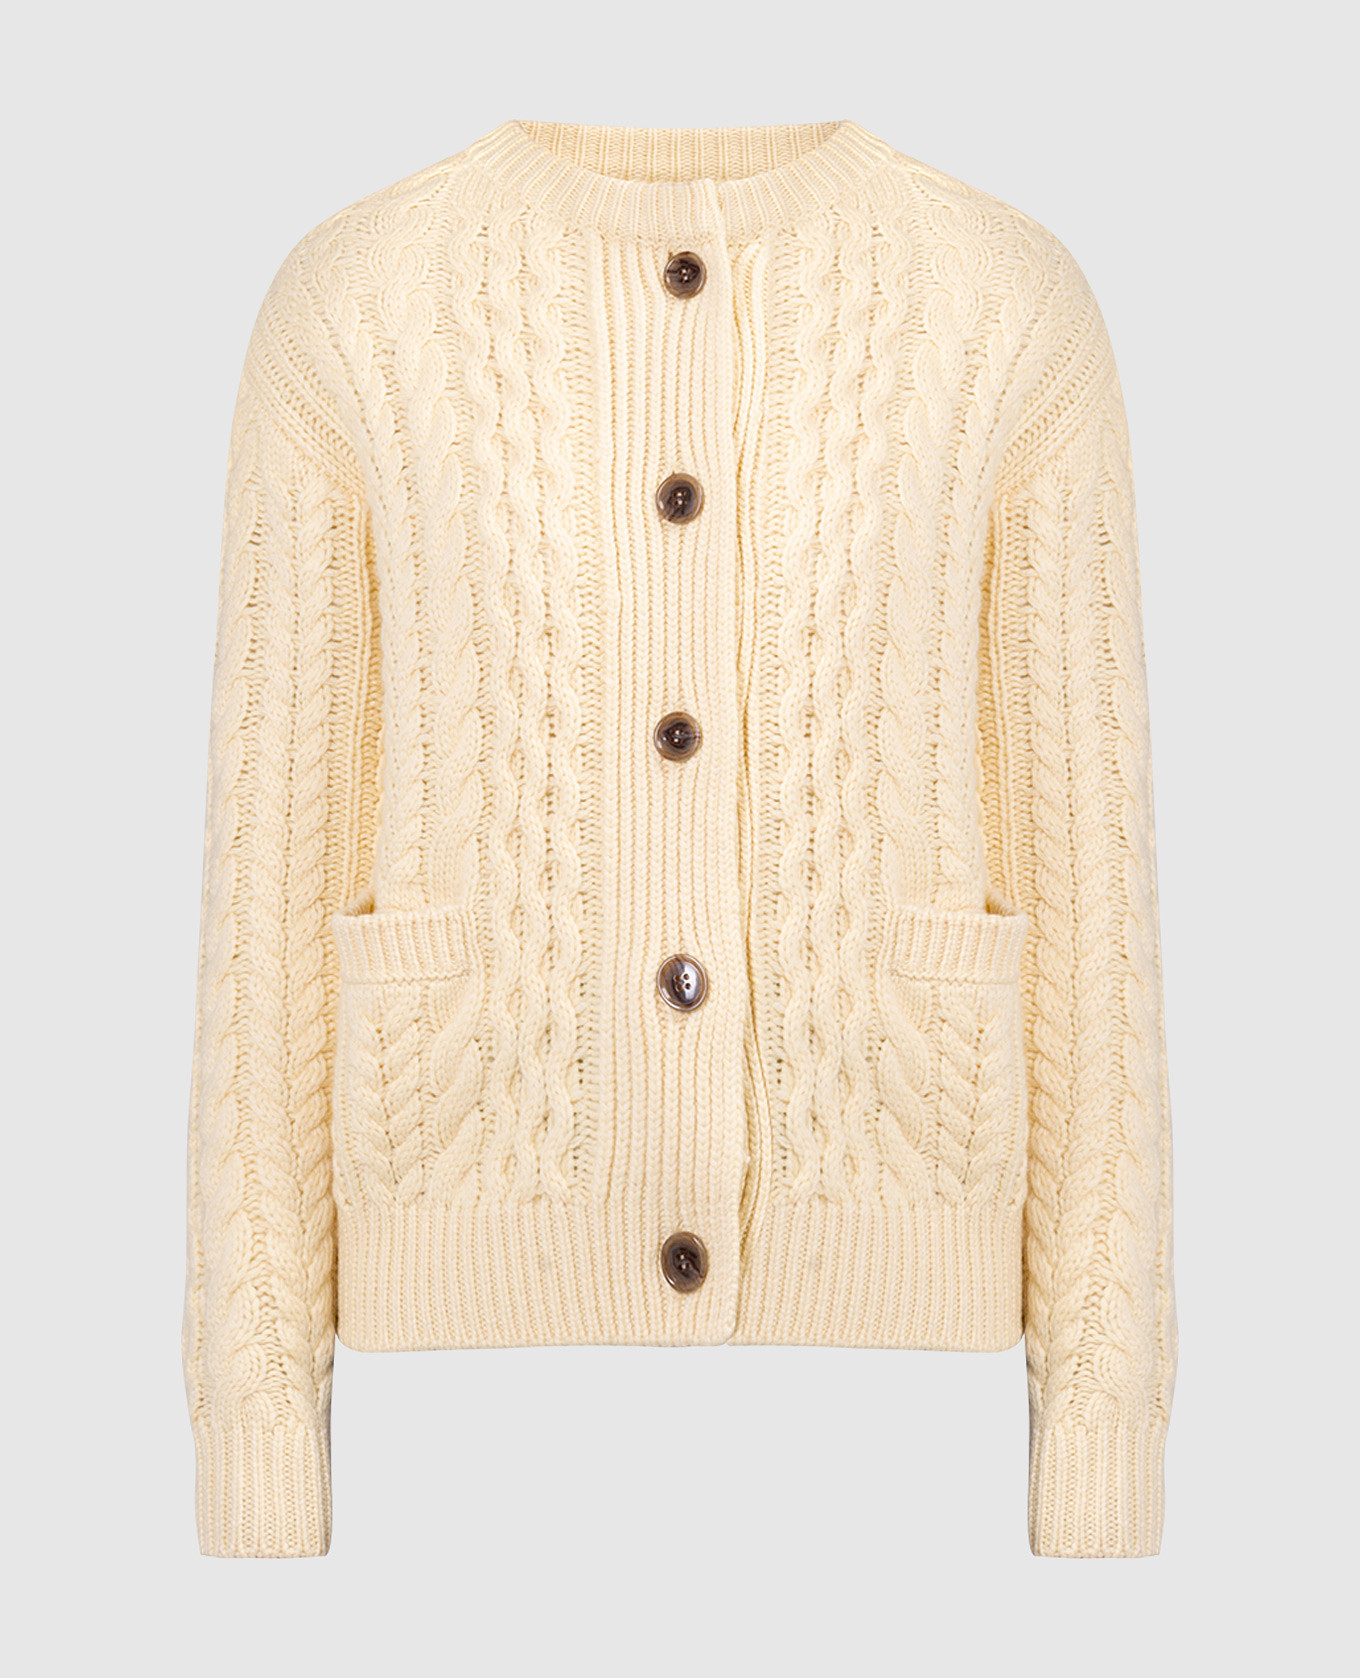 Yellow cashmere cardigan in a textured pattern